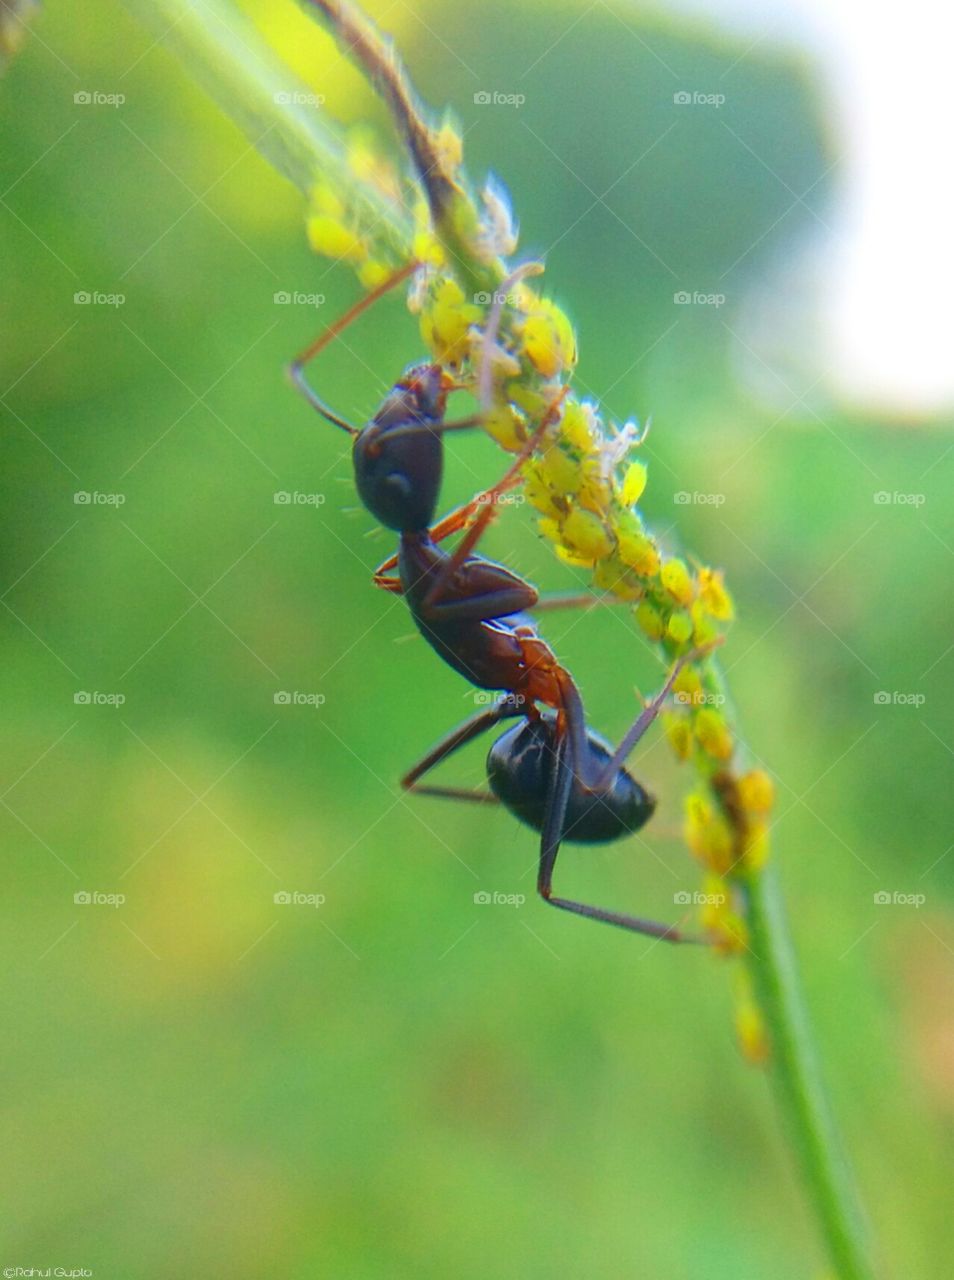 Ant & insect